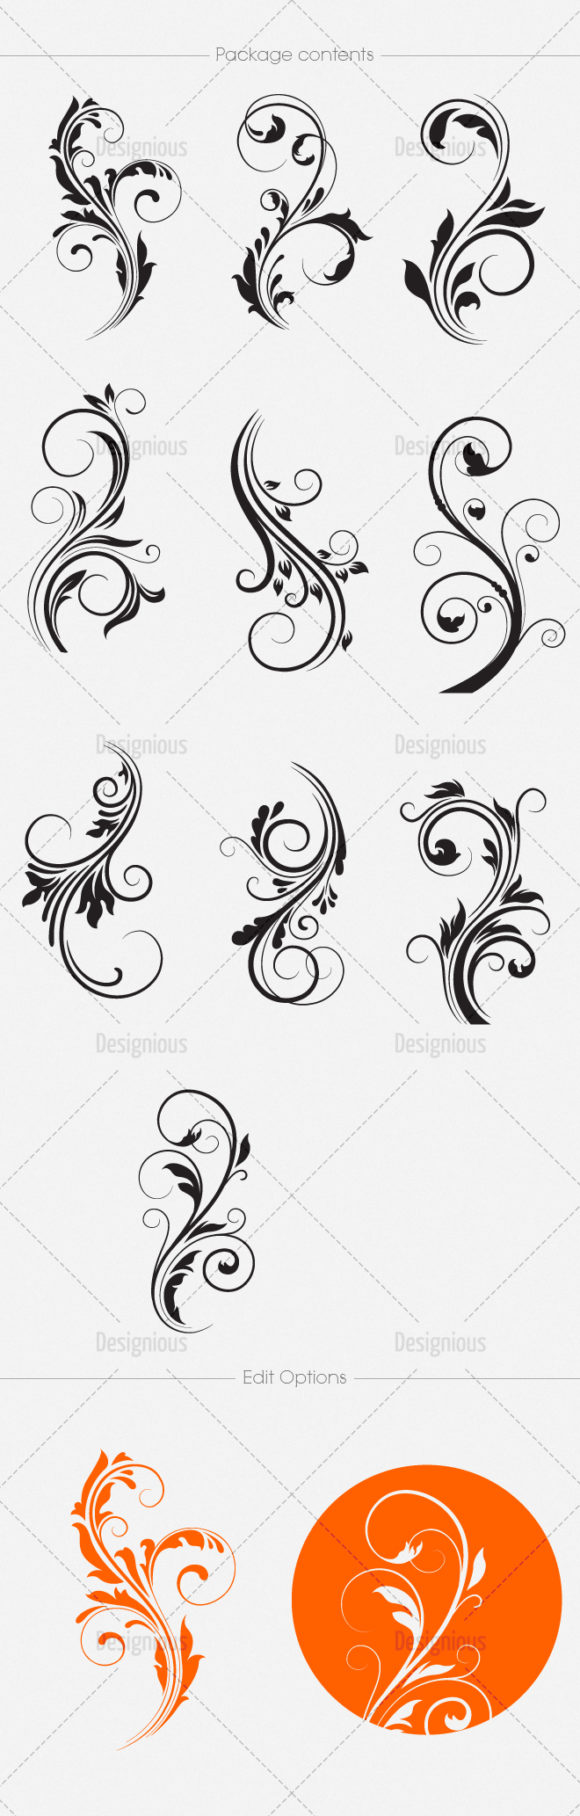 Floral Vector Pack 112 2